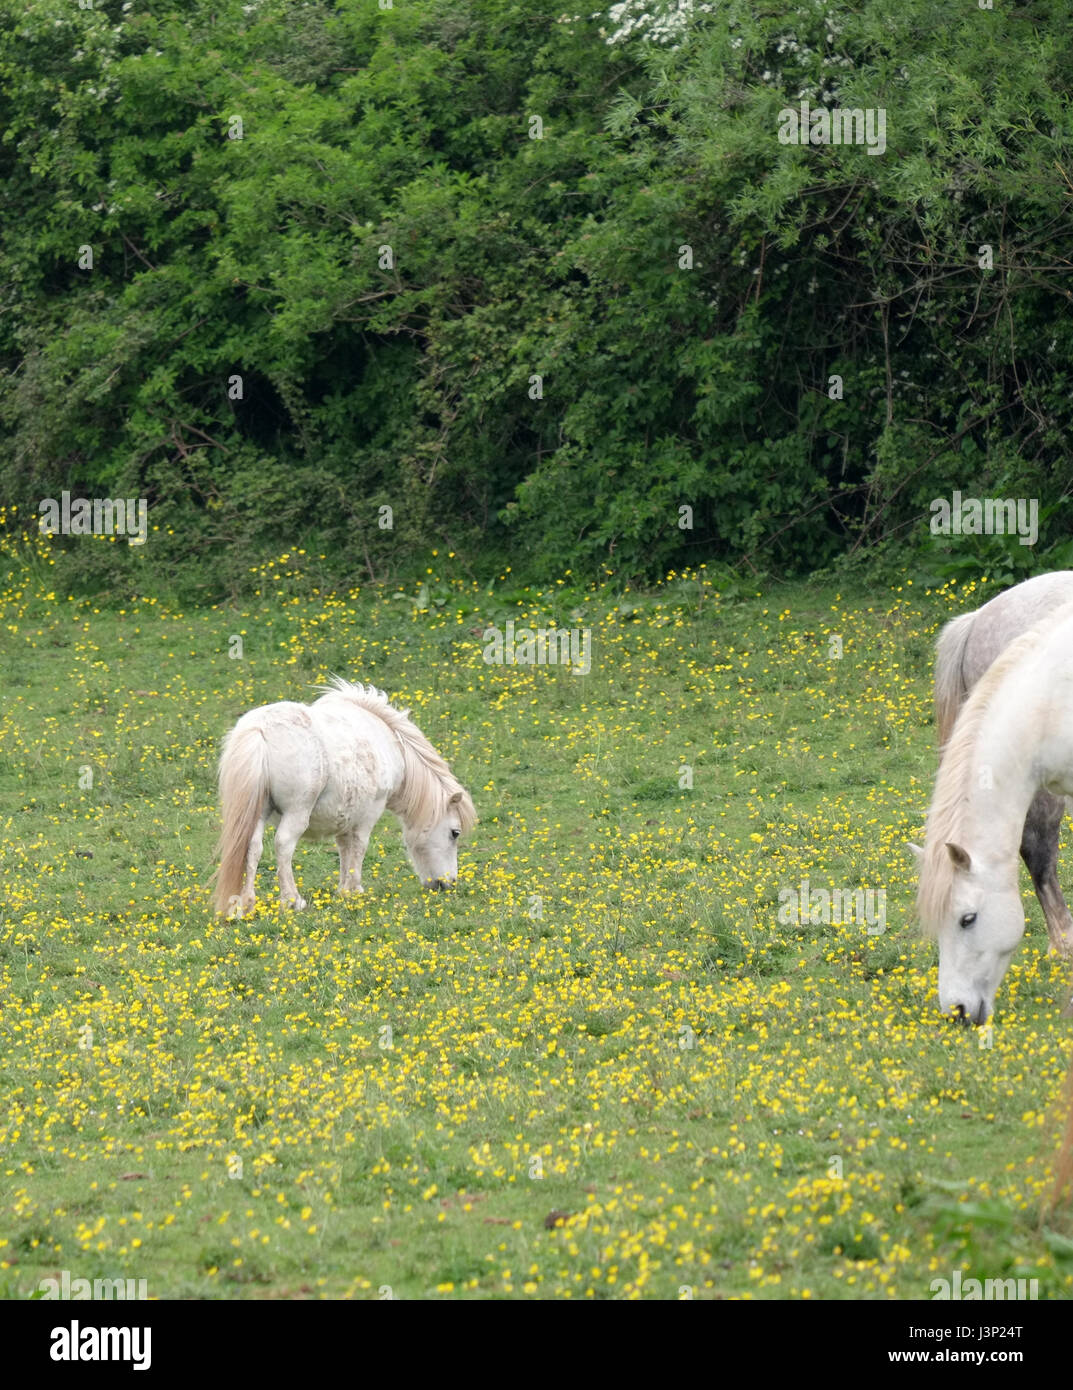 6th May 2017 - Small white pony horse grazing in field of Dandelion flowers Stock Photo